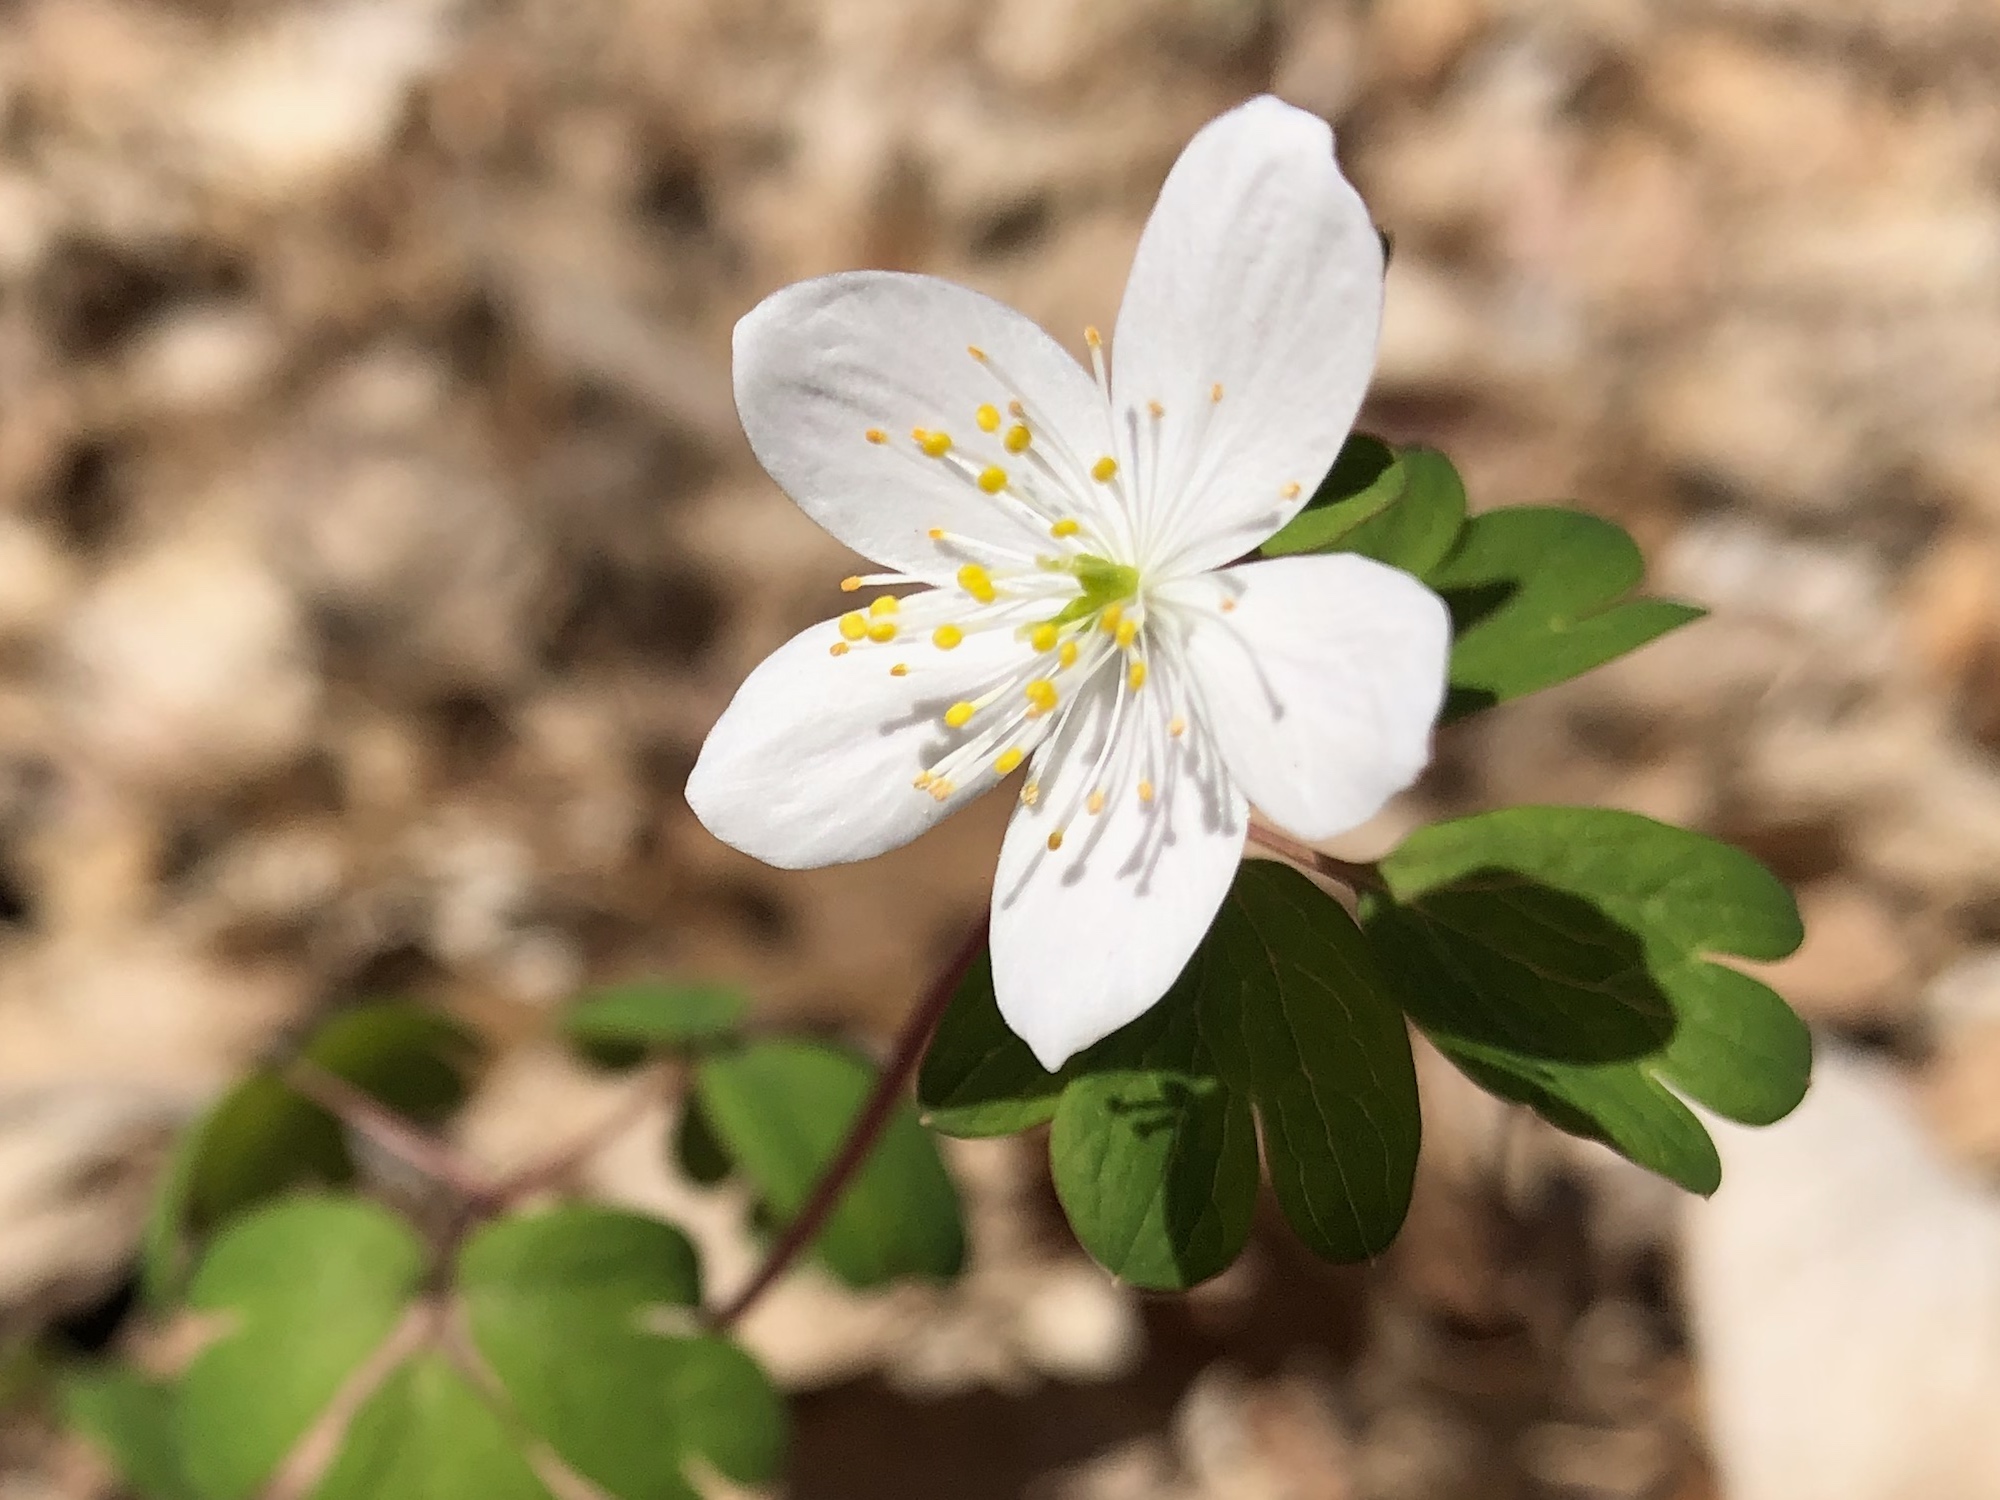 False Rue Anemone in the University of Wisconsin Arboretum Native Gardens in Madison, Wisconsin on April 17, 2021.